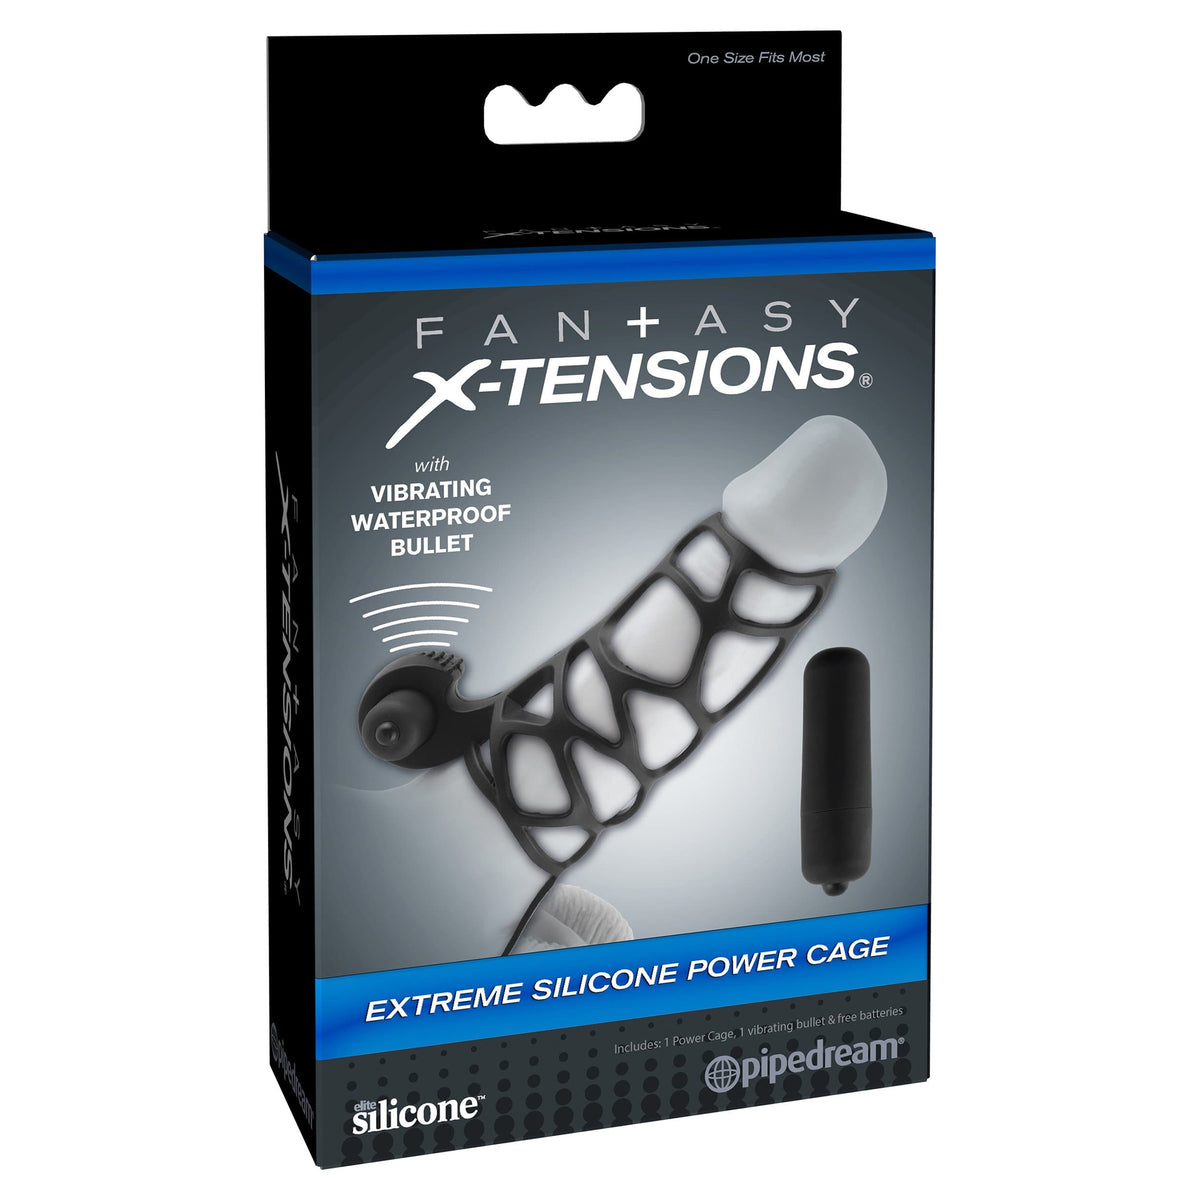 Pipedream - Fantasy X-tensions Extreme Silicone Power Cage PD1226 CherryAffairs